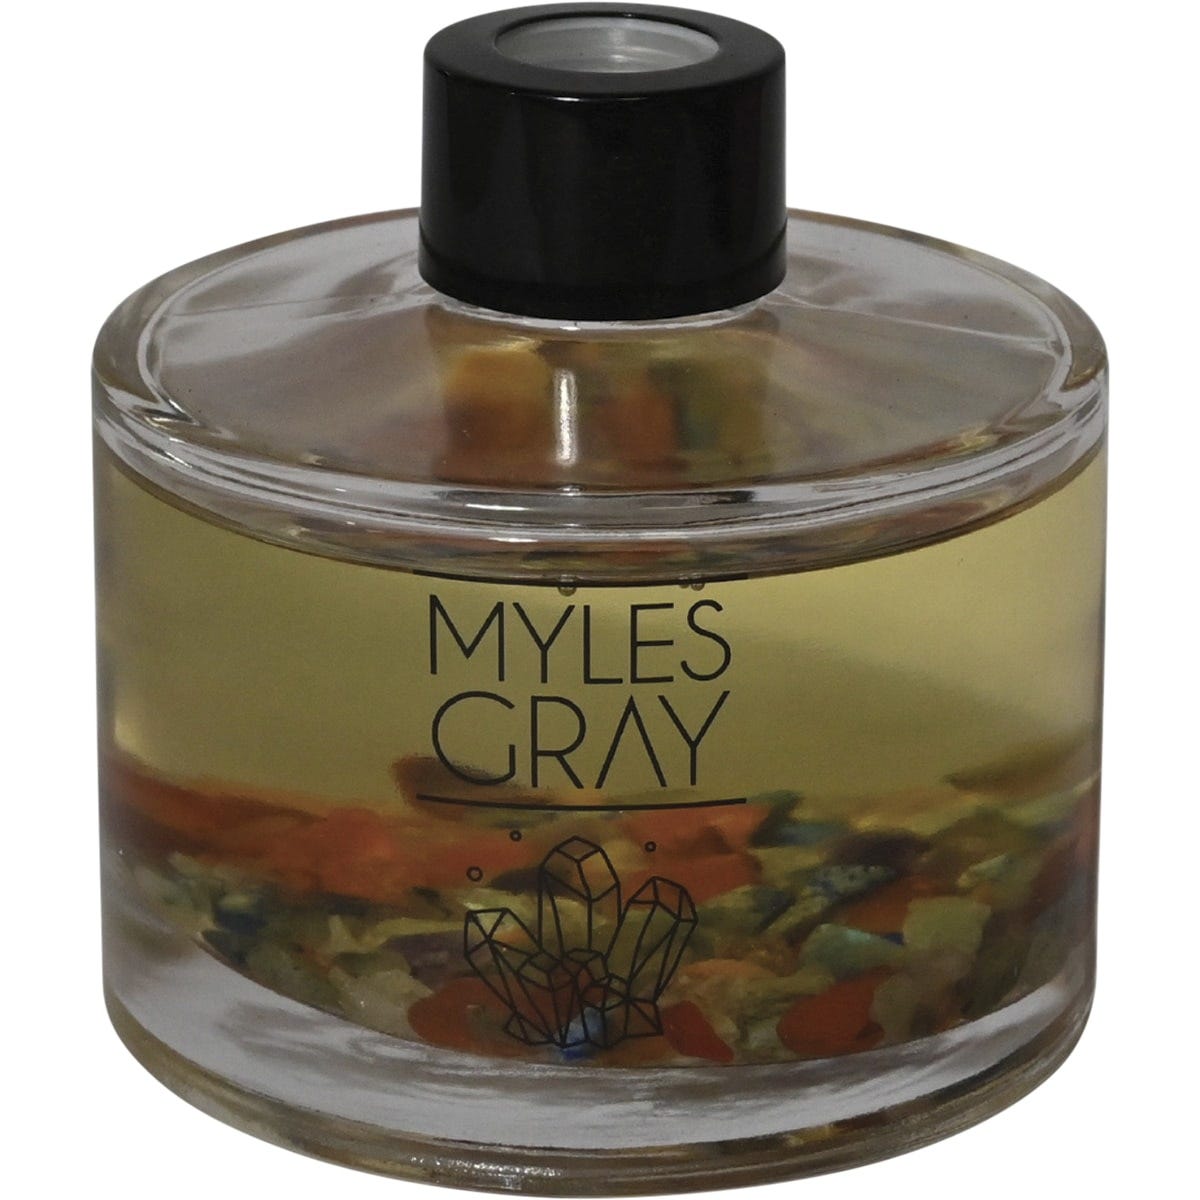 Myles Gray Crystal Infused Reed Diffuser Pride Raspberry Vanilla 200ml - Dr Earth - Aromatherapy, Gifts